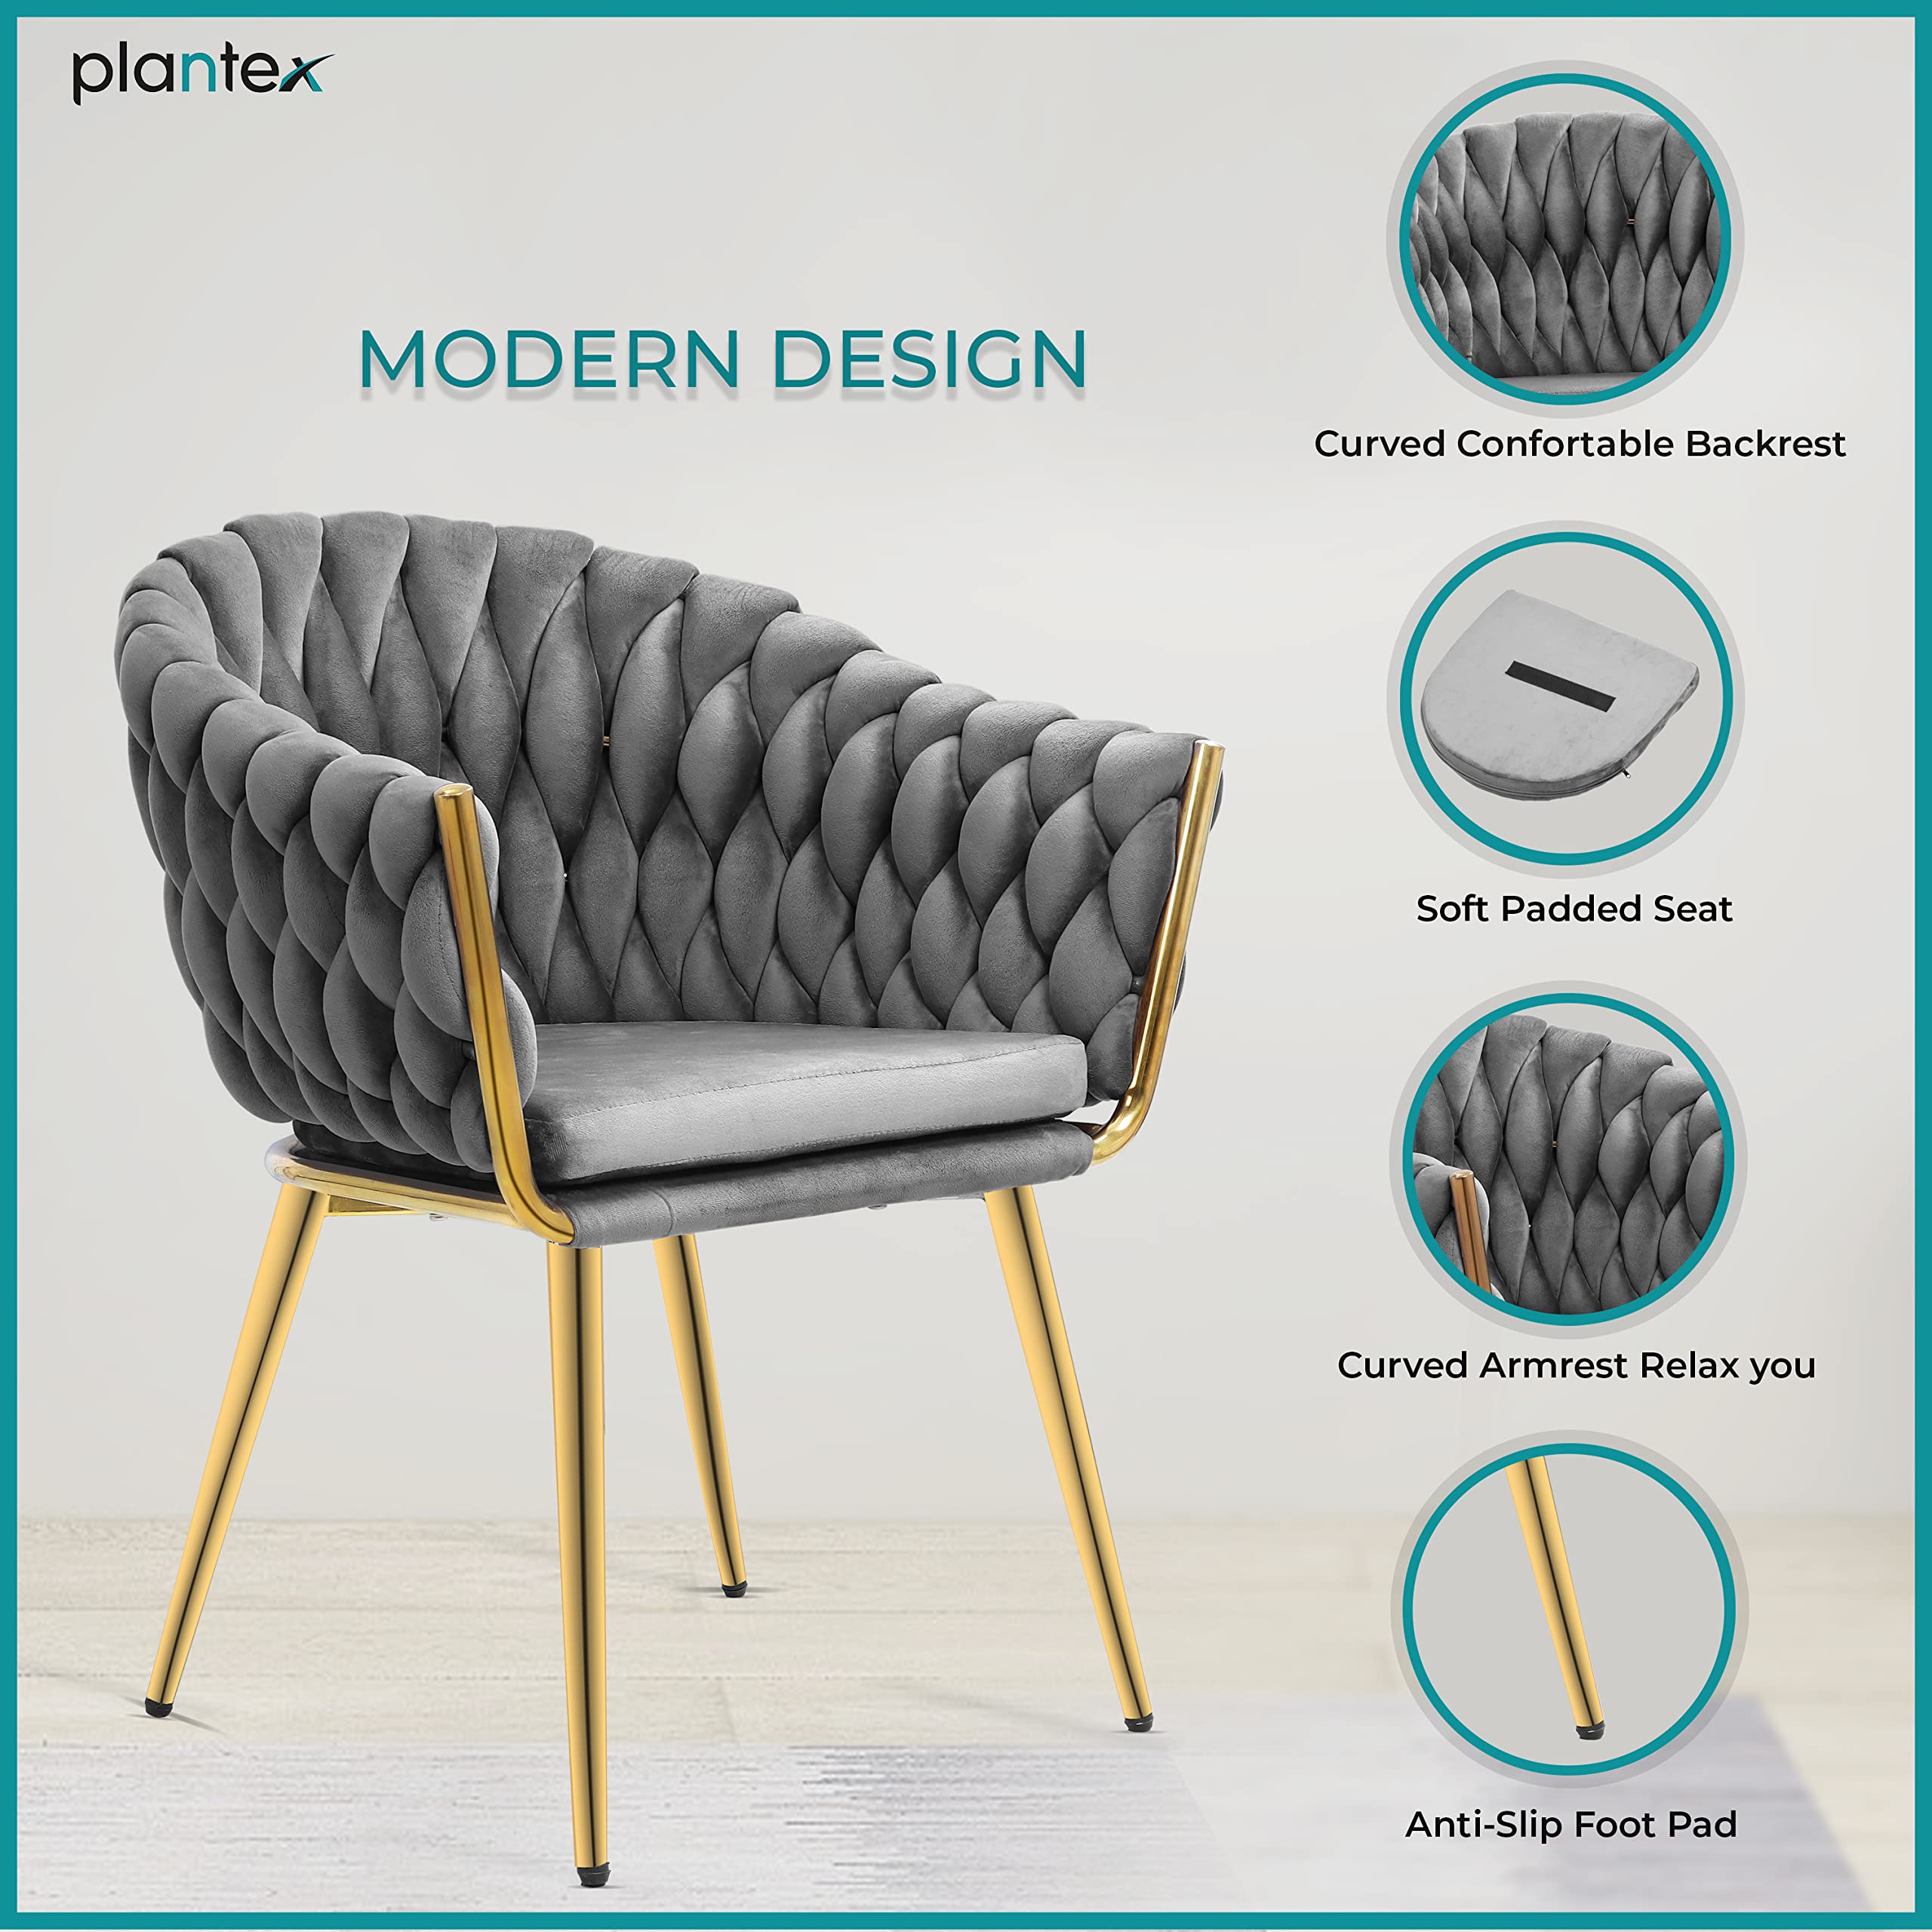 Plantex Morden Peradox Chair with Sitting Cushion for Home/Peradox Chair with PVD Gold Leg for Cafe/Restaurant/Office/Living Room/Bed Room (APS-1042-Grey & PVD Gold)